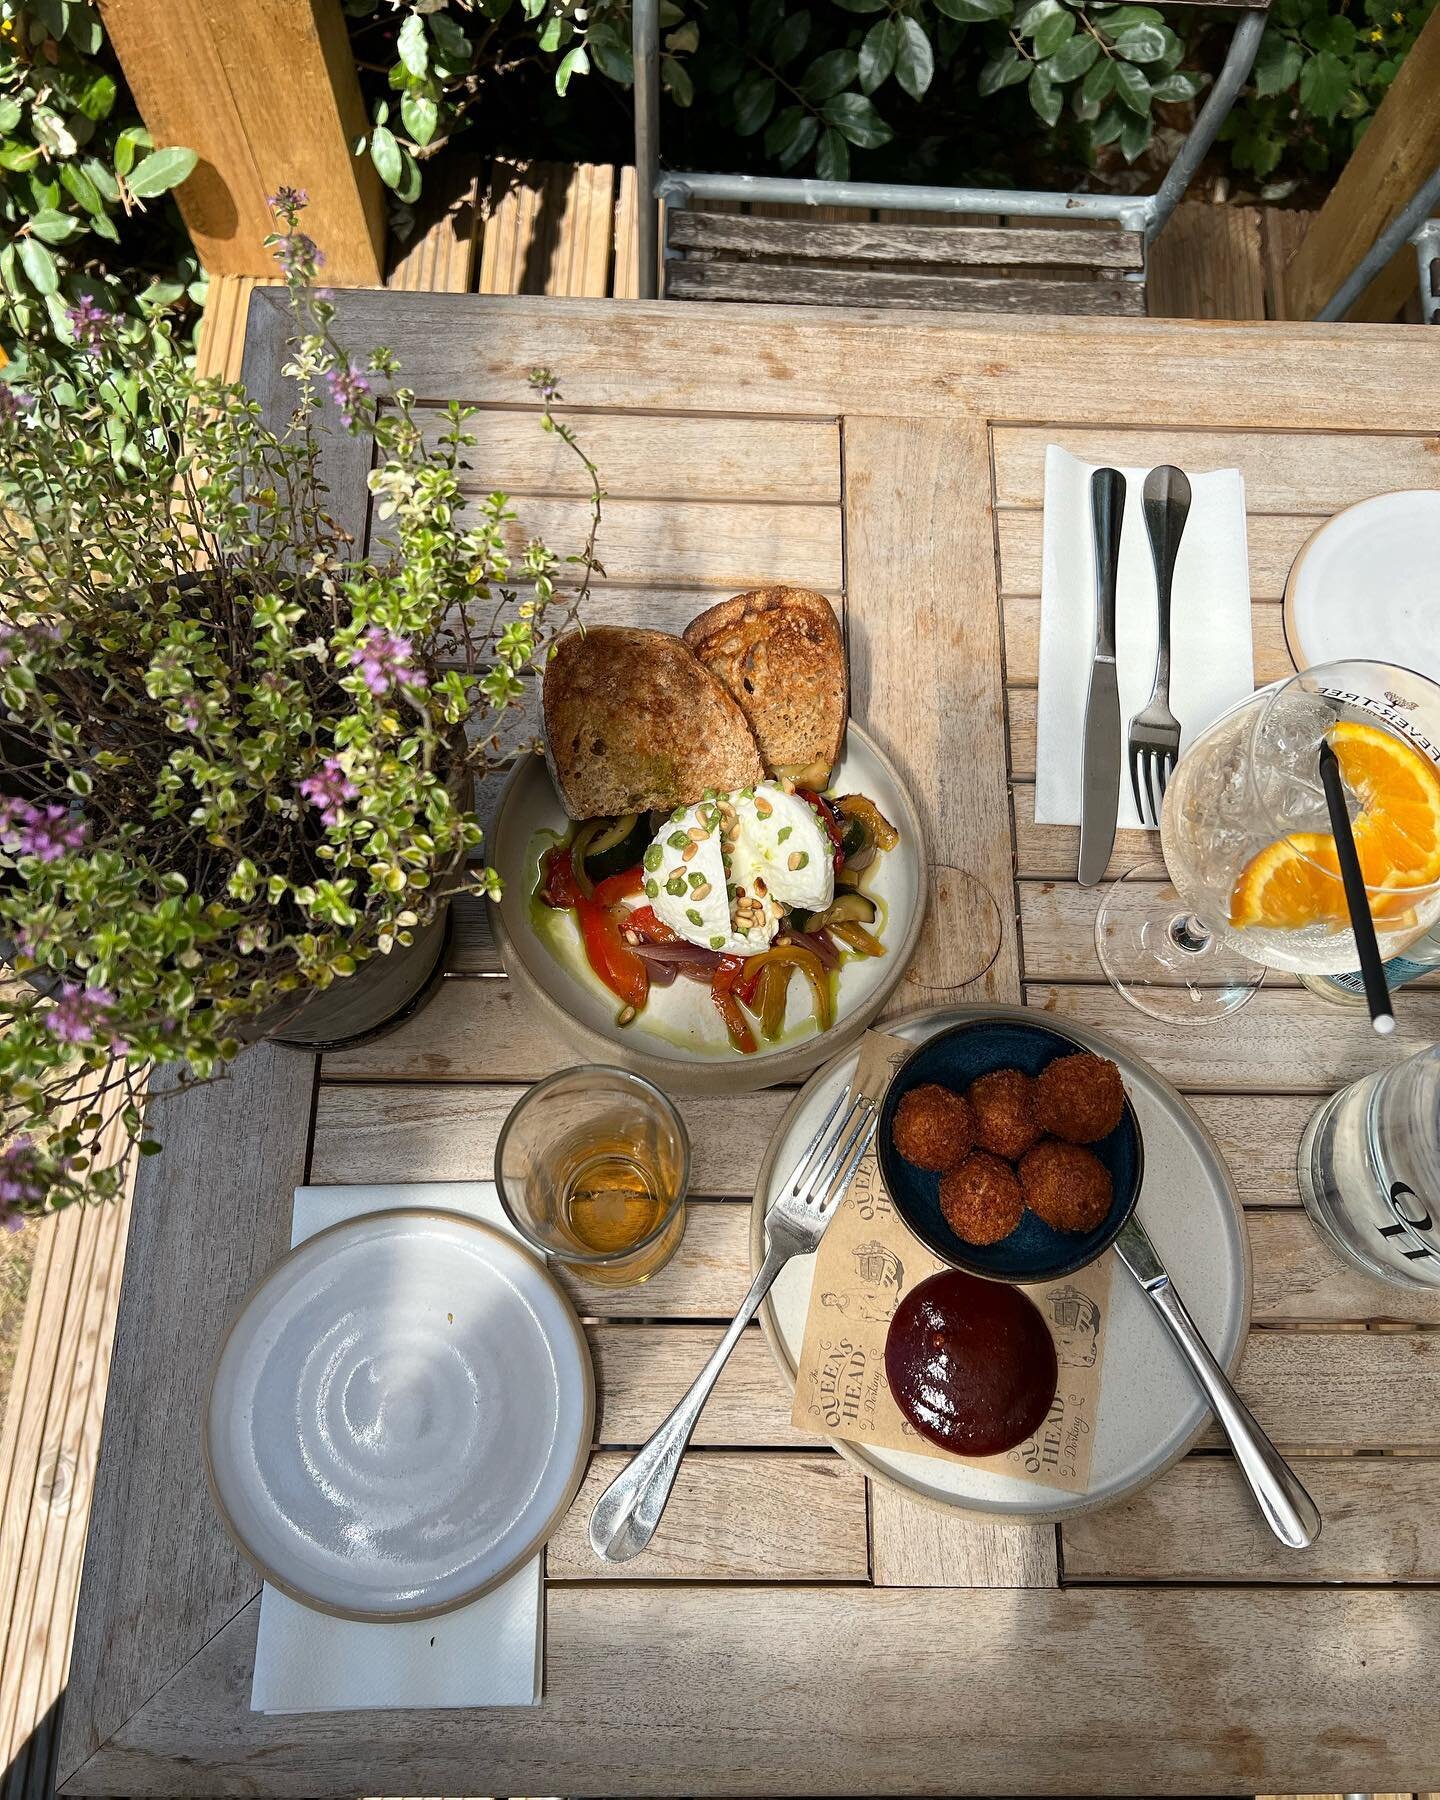 Here&rsquo;s summer in a picture 🍹 

G&amp;T, beer and snacks in our summer terrace

#queensheaddorking #thequeensheaddorking #pubsofinstagram #foodporn #surreyfoodie #surrey #surreylife #michelinguide #foodpics #surreyblogger #surreybloggercollecti